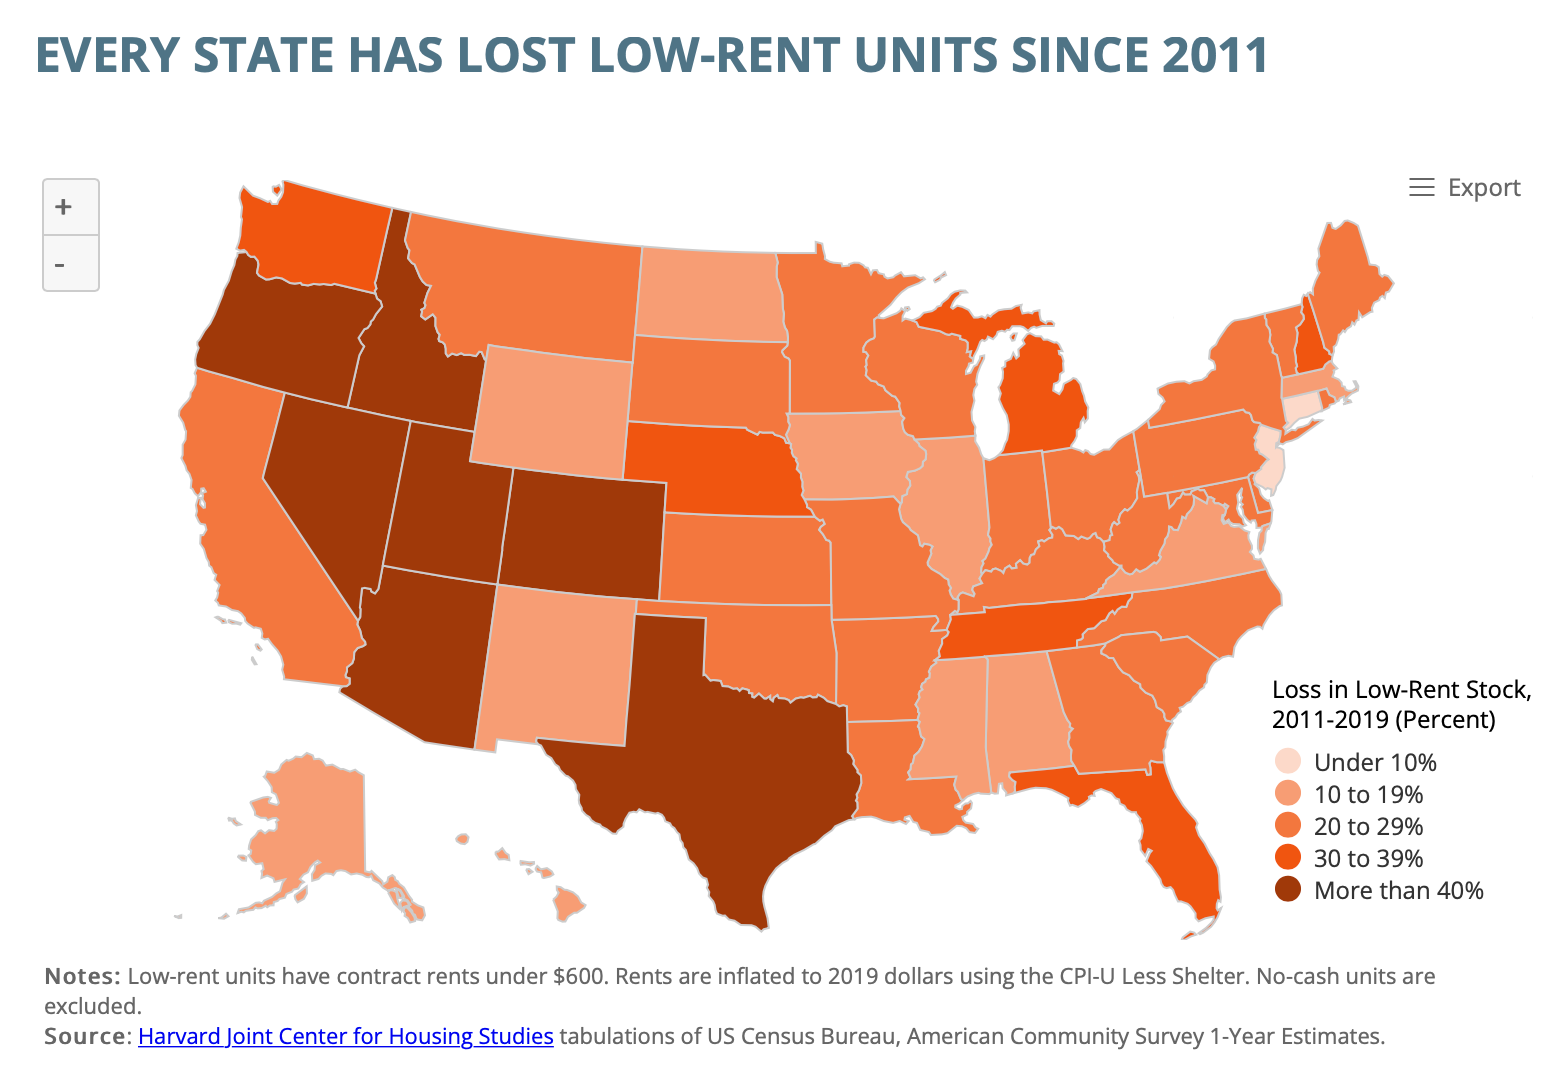 A map of the U.S. on a gradient color scale showing the rate at which each state has lost low-rent units since 2011.